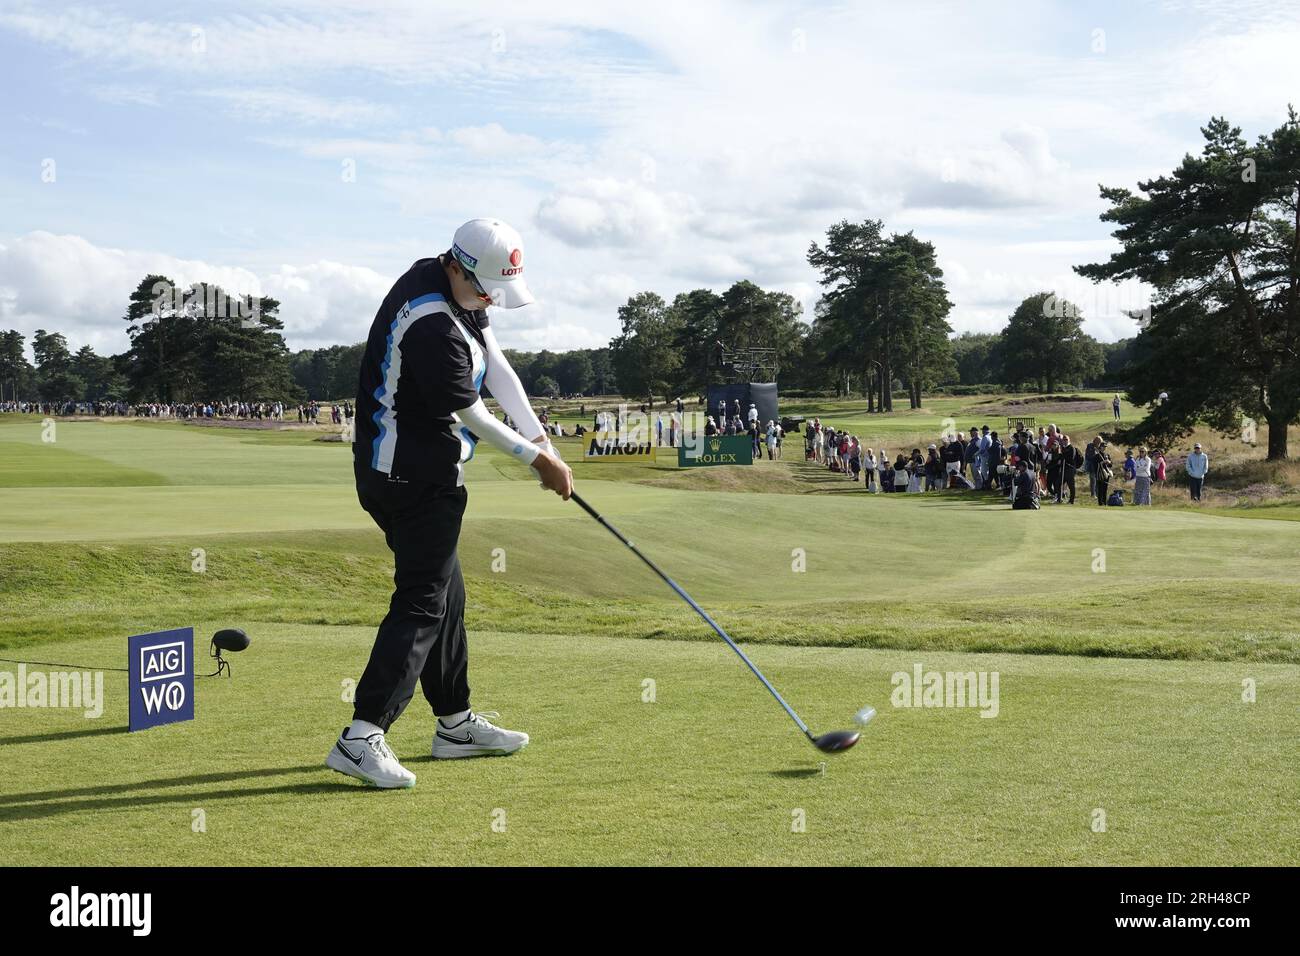 Walton on the Hill, Surrey, UK. 13th Aug, 2023. Action on the final day of The AIG WomenÕs Open at Walton Heath Golf Club ( organised by the Royal & Ancient Golf Club of St. Andrews - R&A Our picture shows: Hyo Joo Kim (KOR) drives on the 15th tee. Credit: Motofoto/Alamy Live News Stock Photo